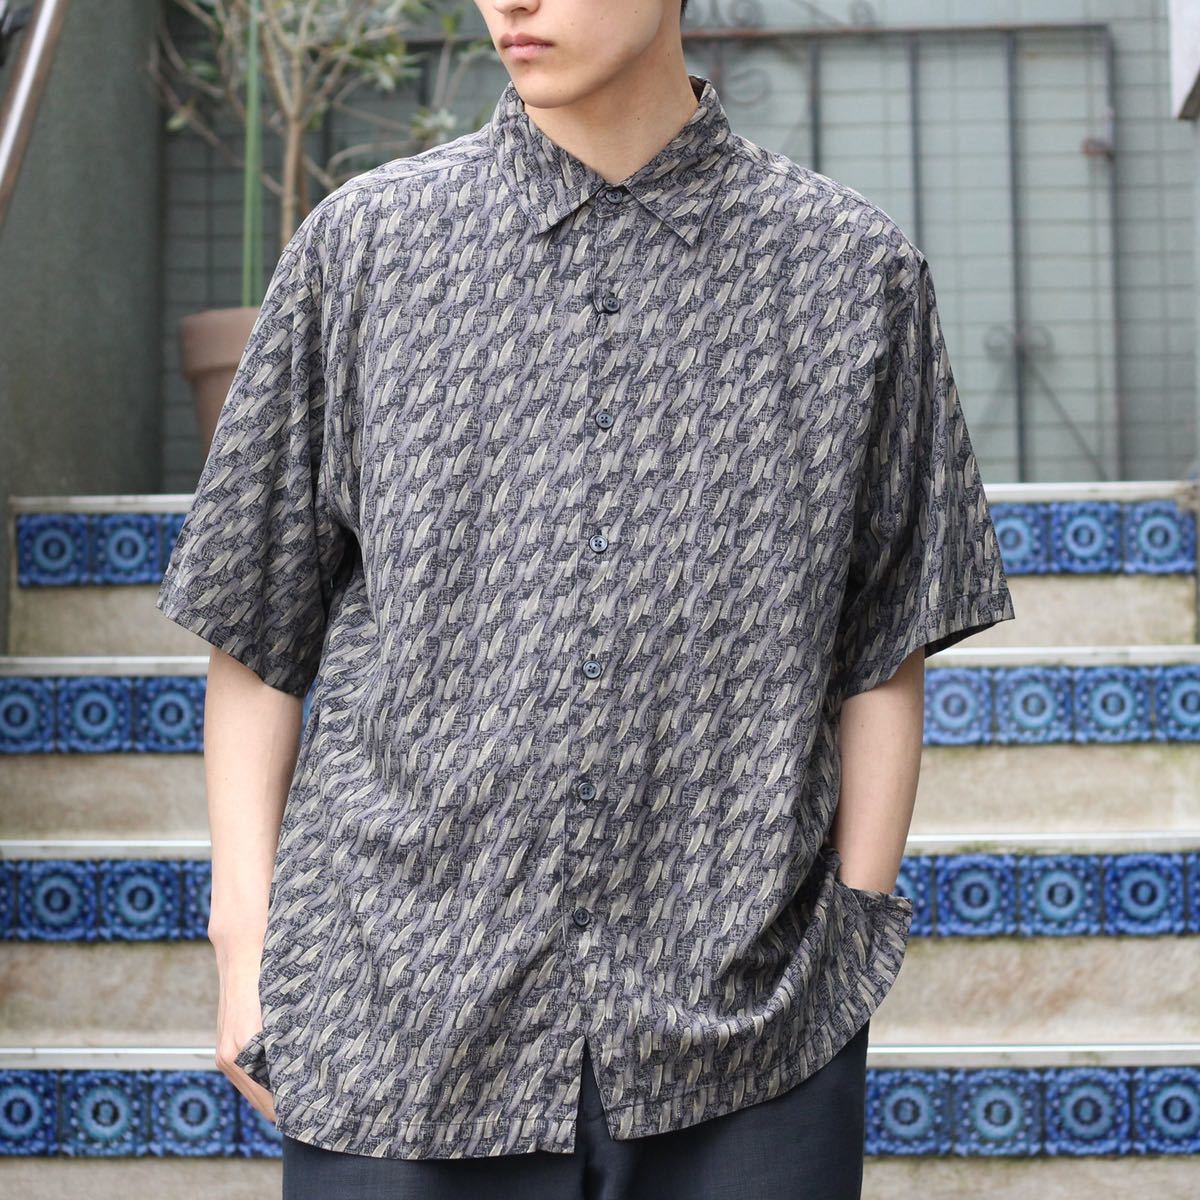 USA VINTAGE HALF SLEEVE PATTERNED ALL OVER SILK SHIRT/アメリカ古着半袖総柄シルクシャツ